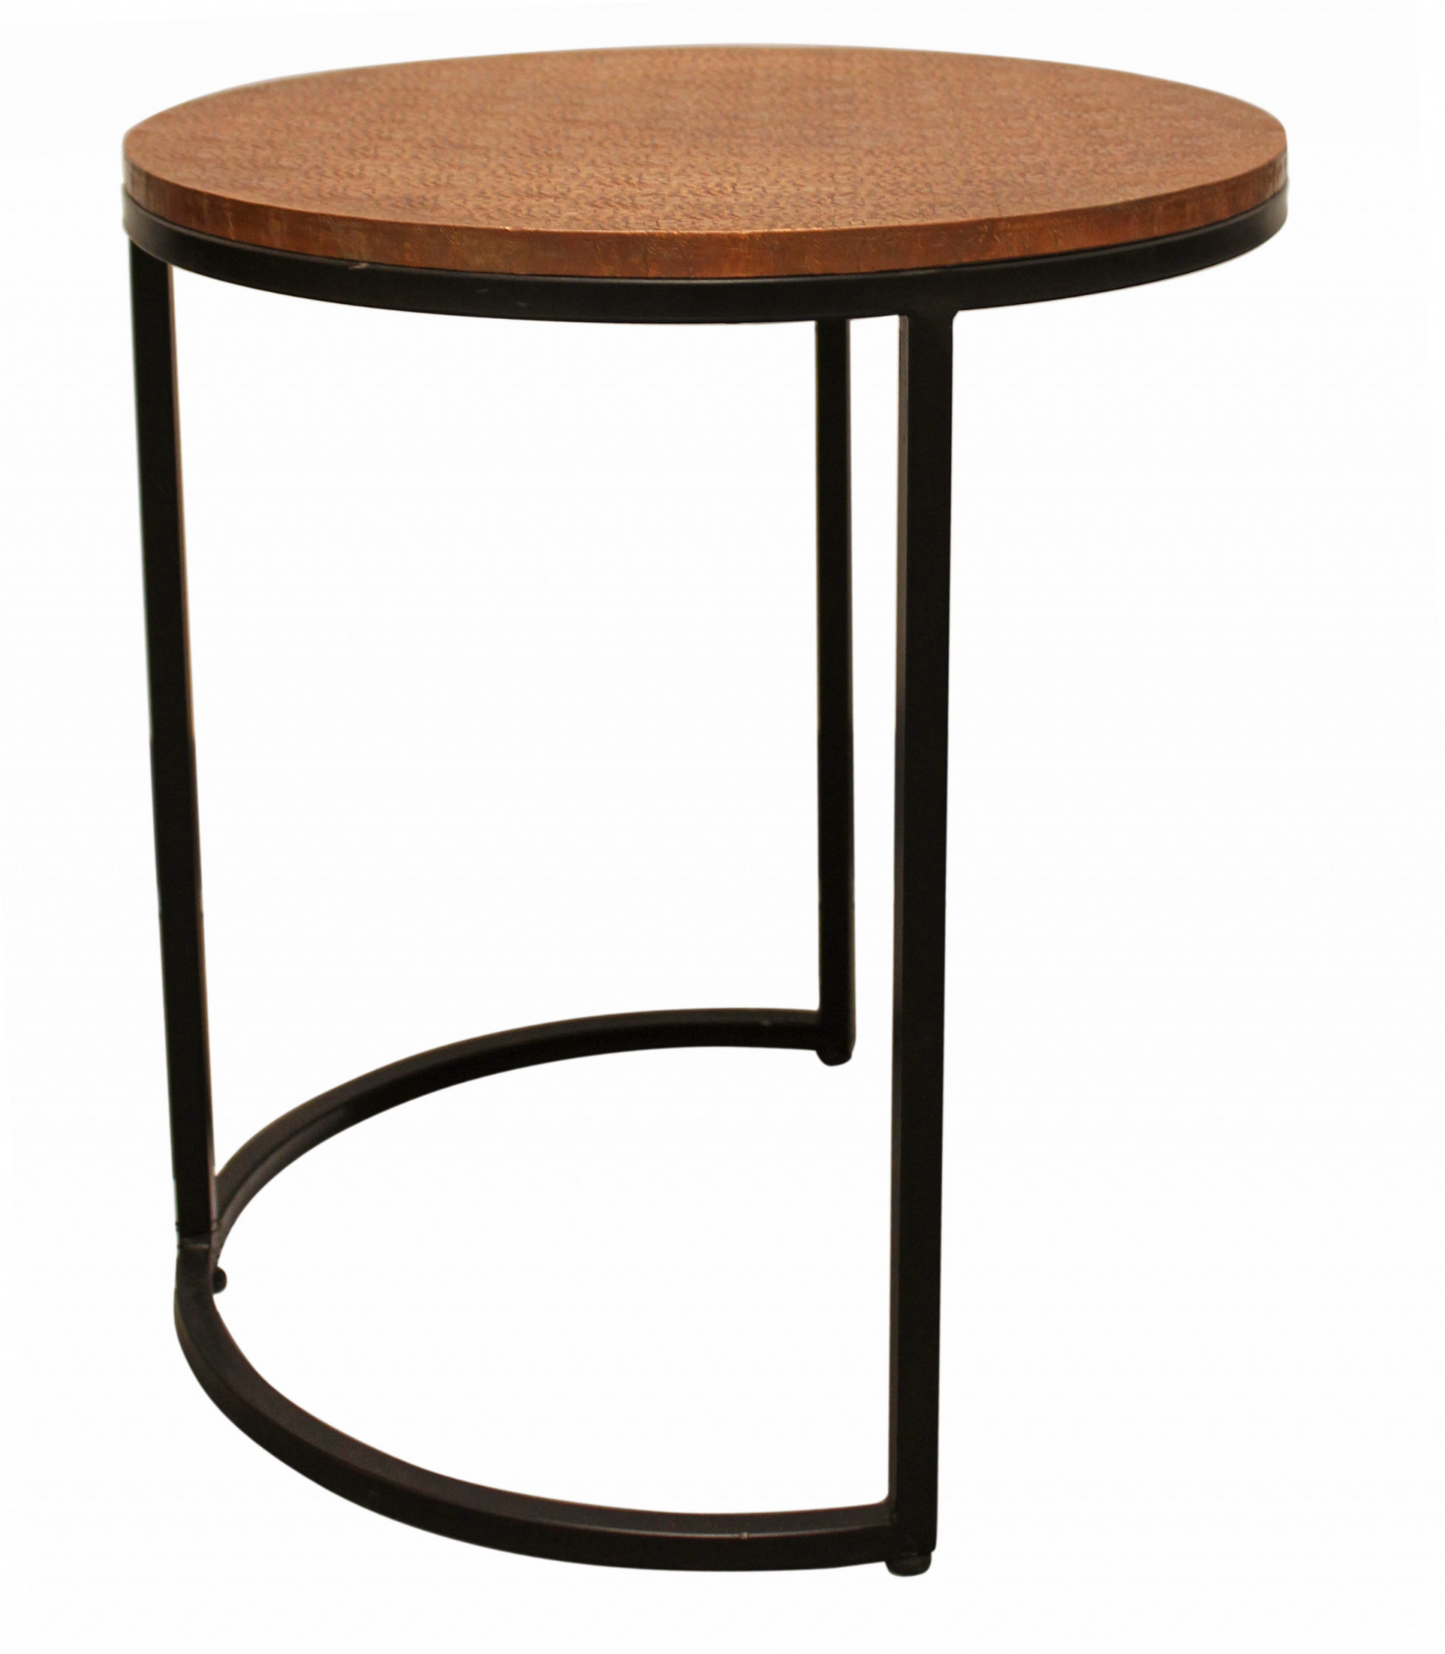 "Set Of Three 19"" Black And Copper Round Nested Tables"